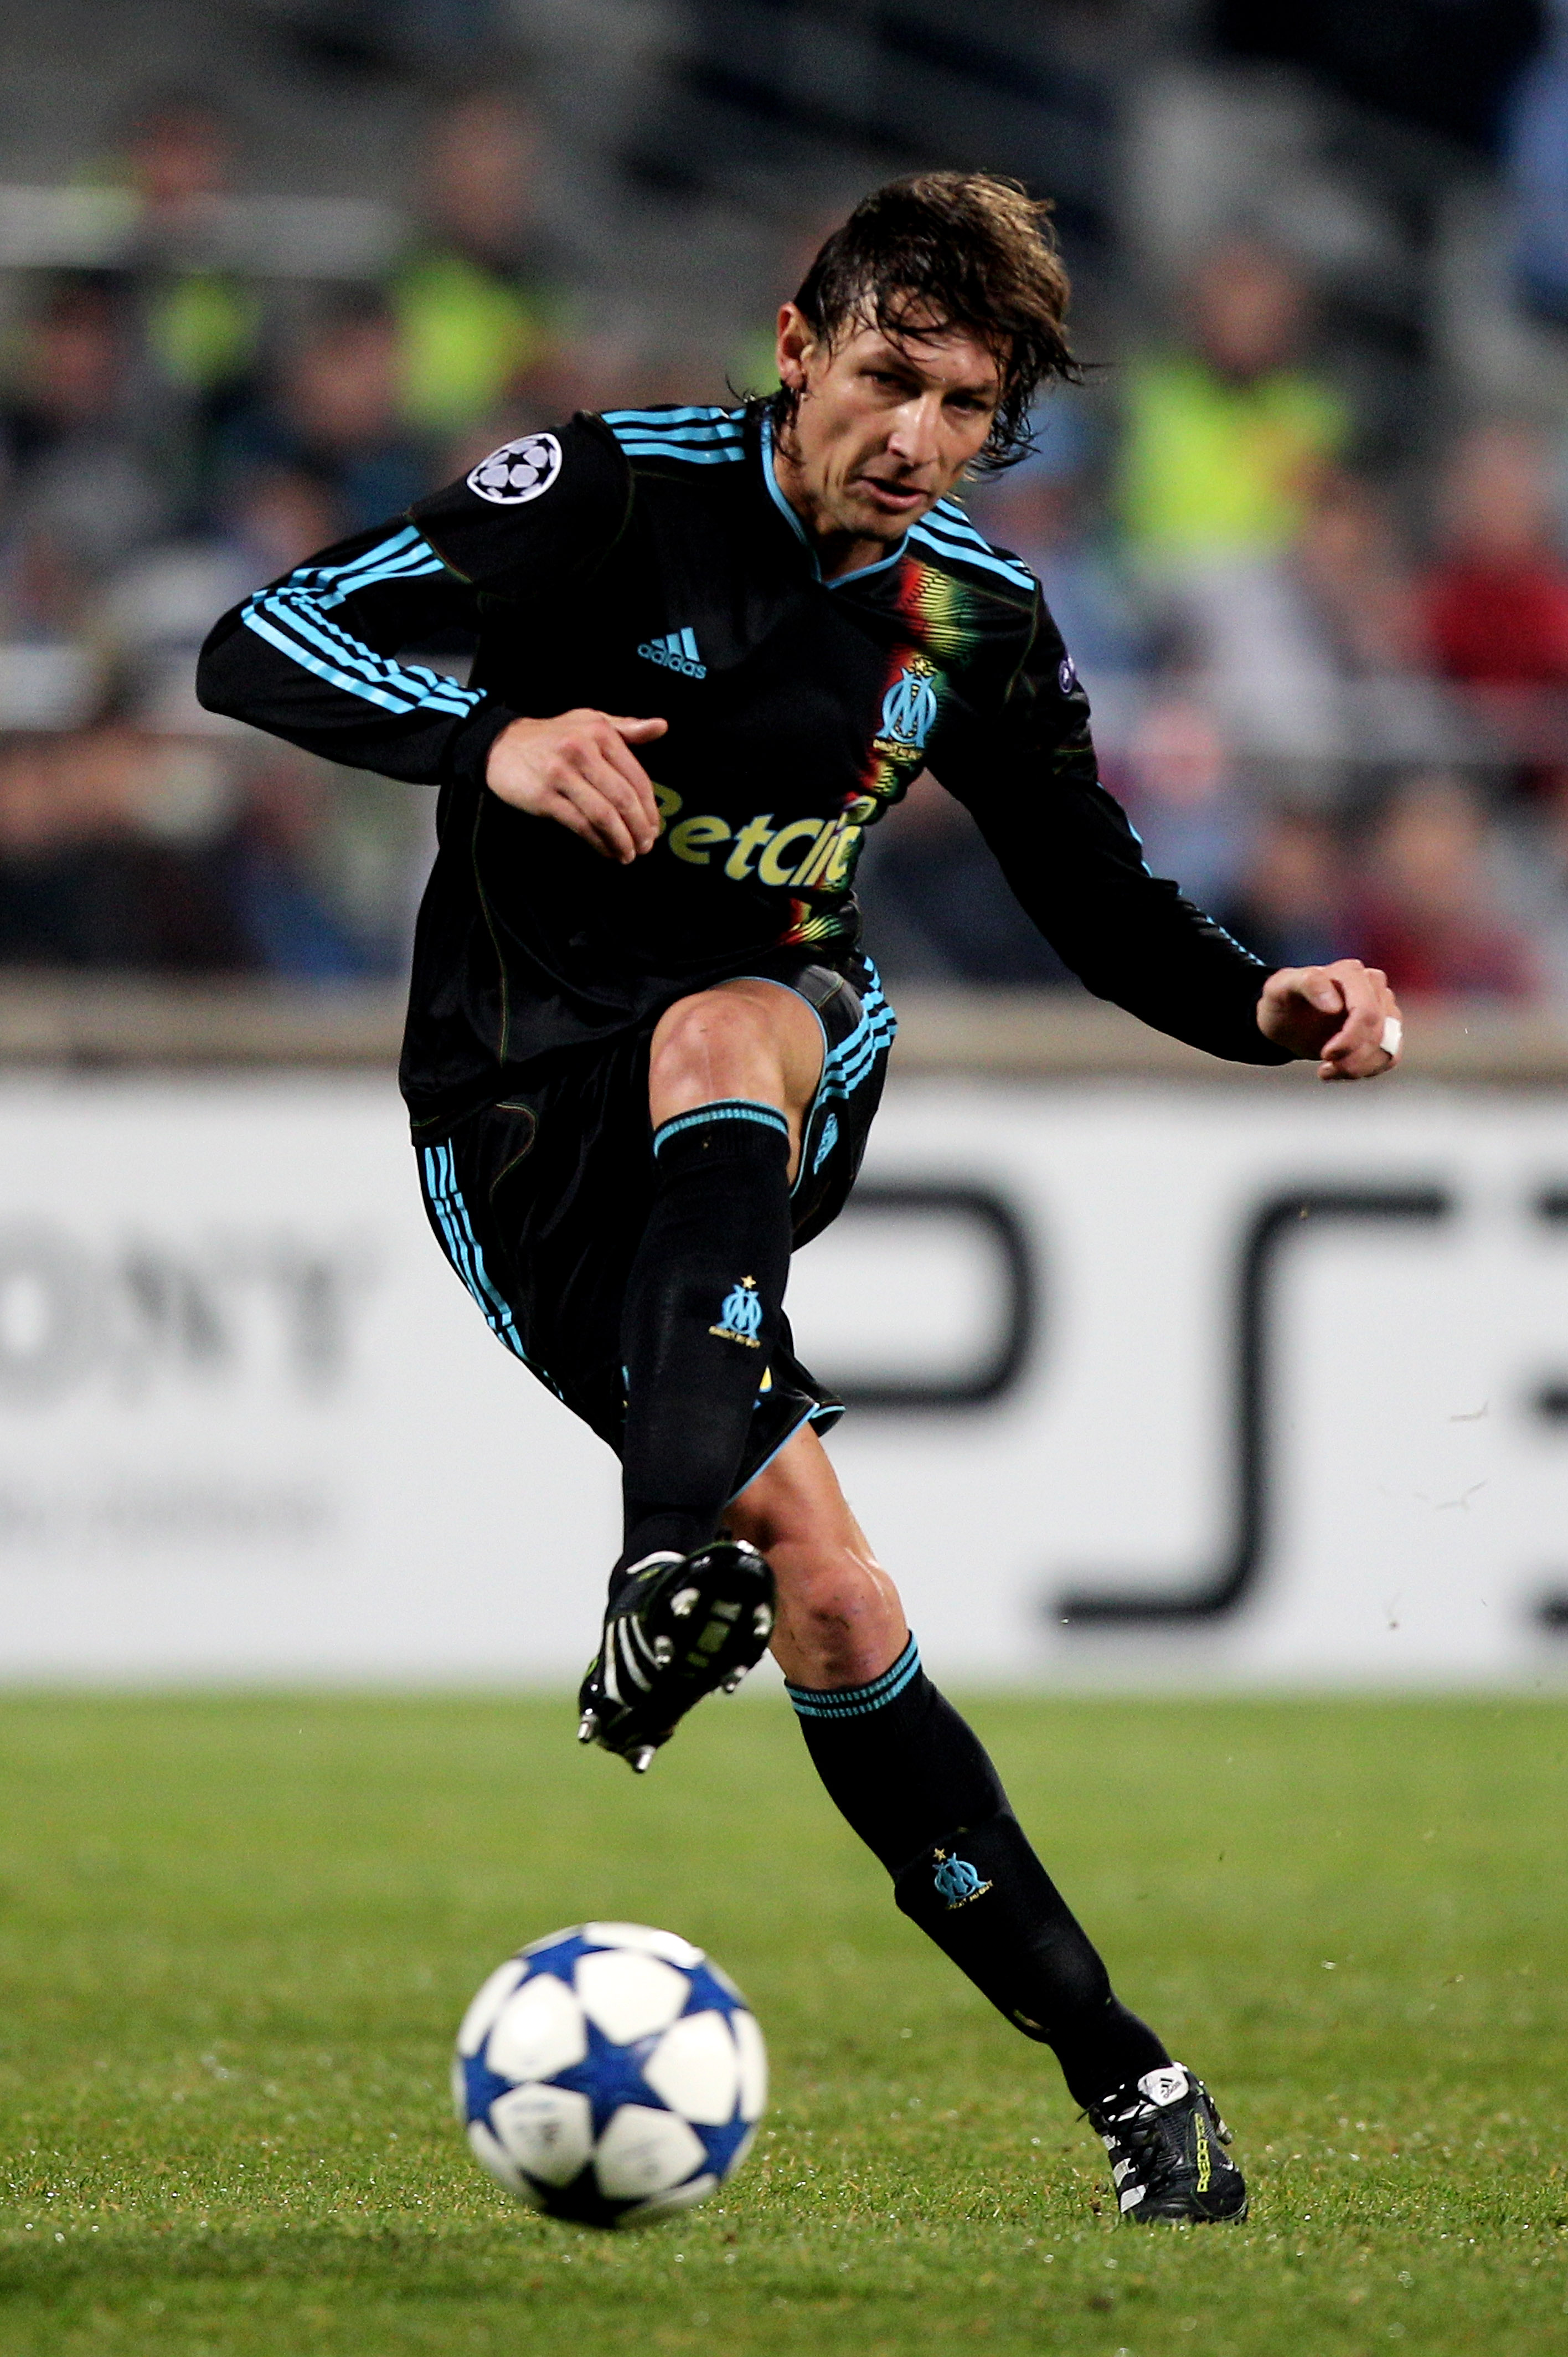 MARSEILLE, FRANCE - DECEMBER 08: Gabriel Heinze of Marseille passes the ball during the UEFA Champions League Group F match between Marseille and Chelsea at the Stade Velodrome on December 8, 2010 in Marseille, France. (Photo by Michael Steele/Getty Image